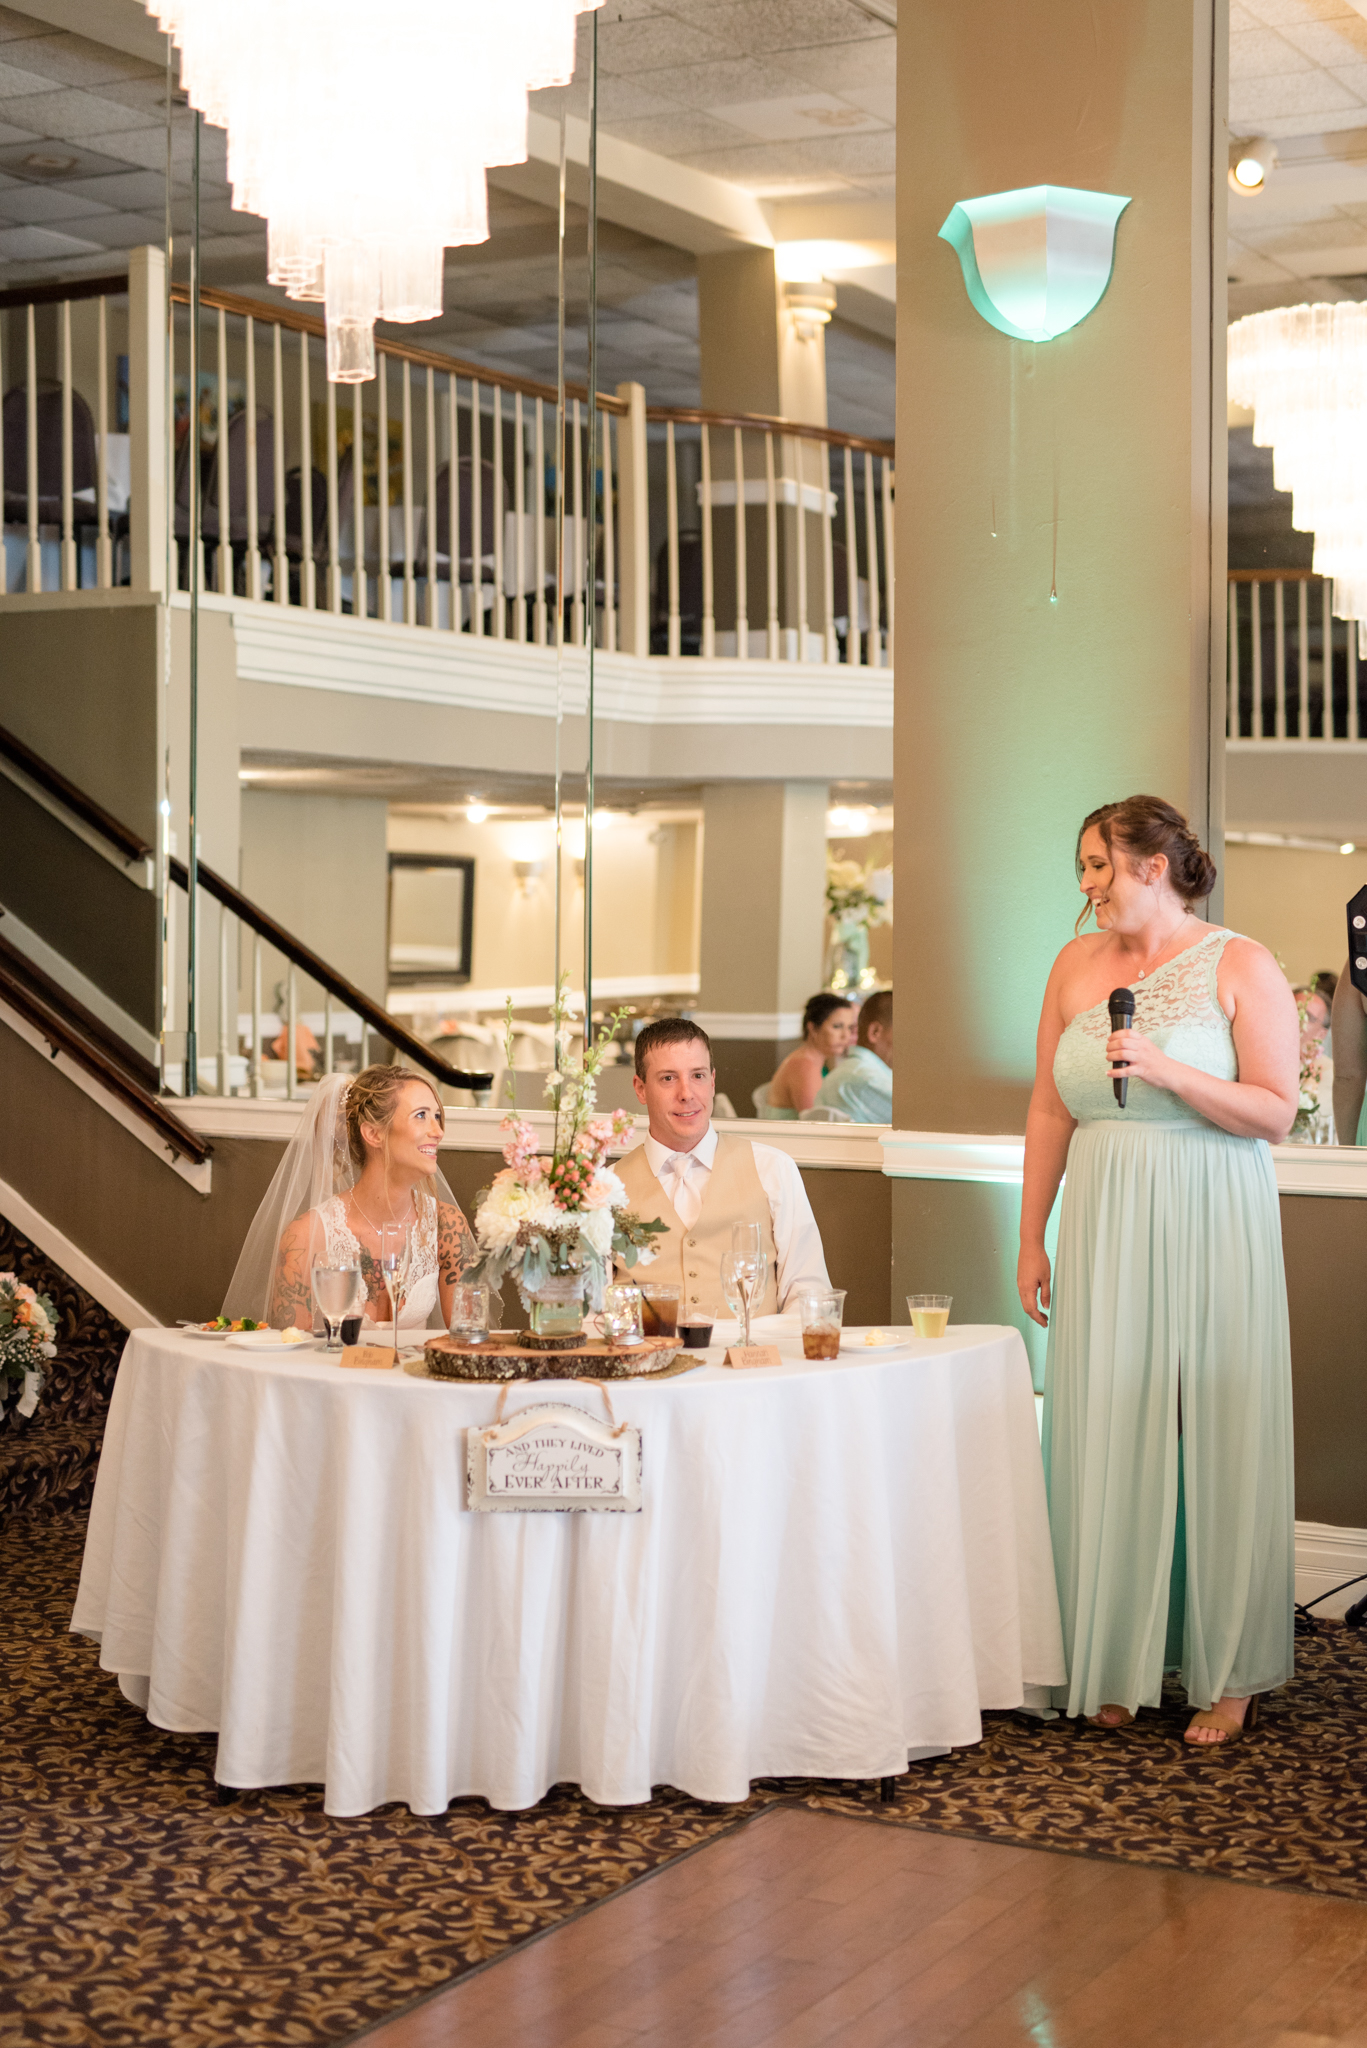 Maid of honor speaks at reception.